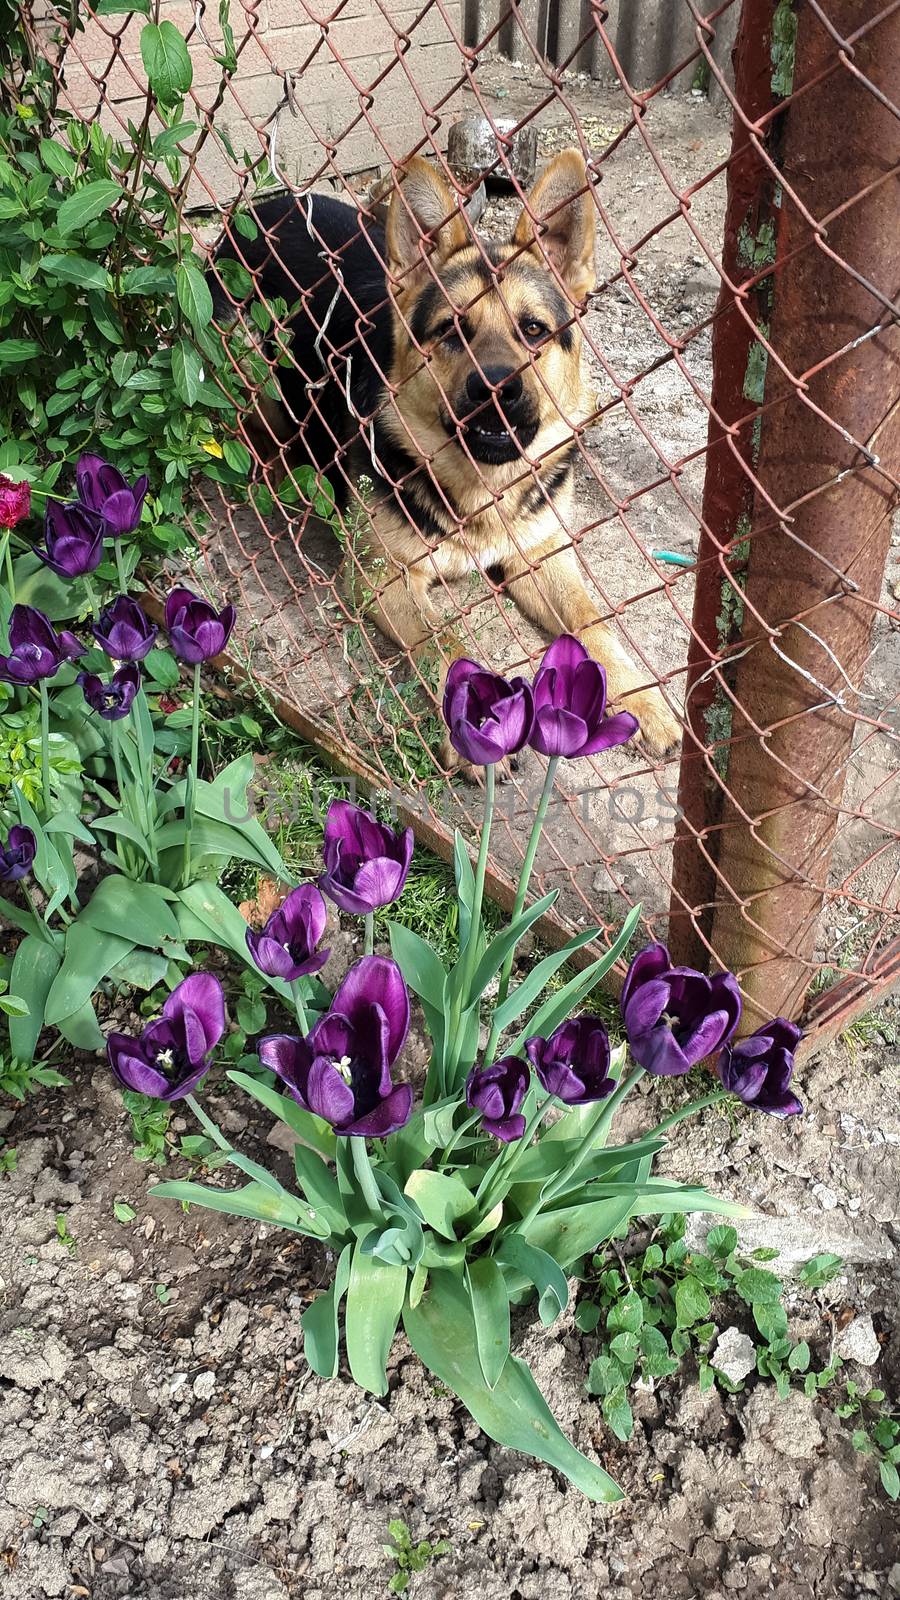 Shepherd dog behind a fence and a flower bed. Violet tulips in front of a dog.